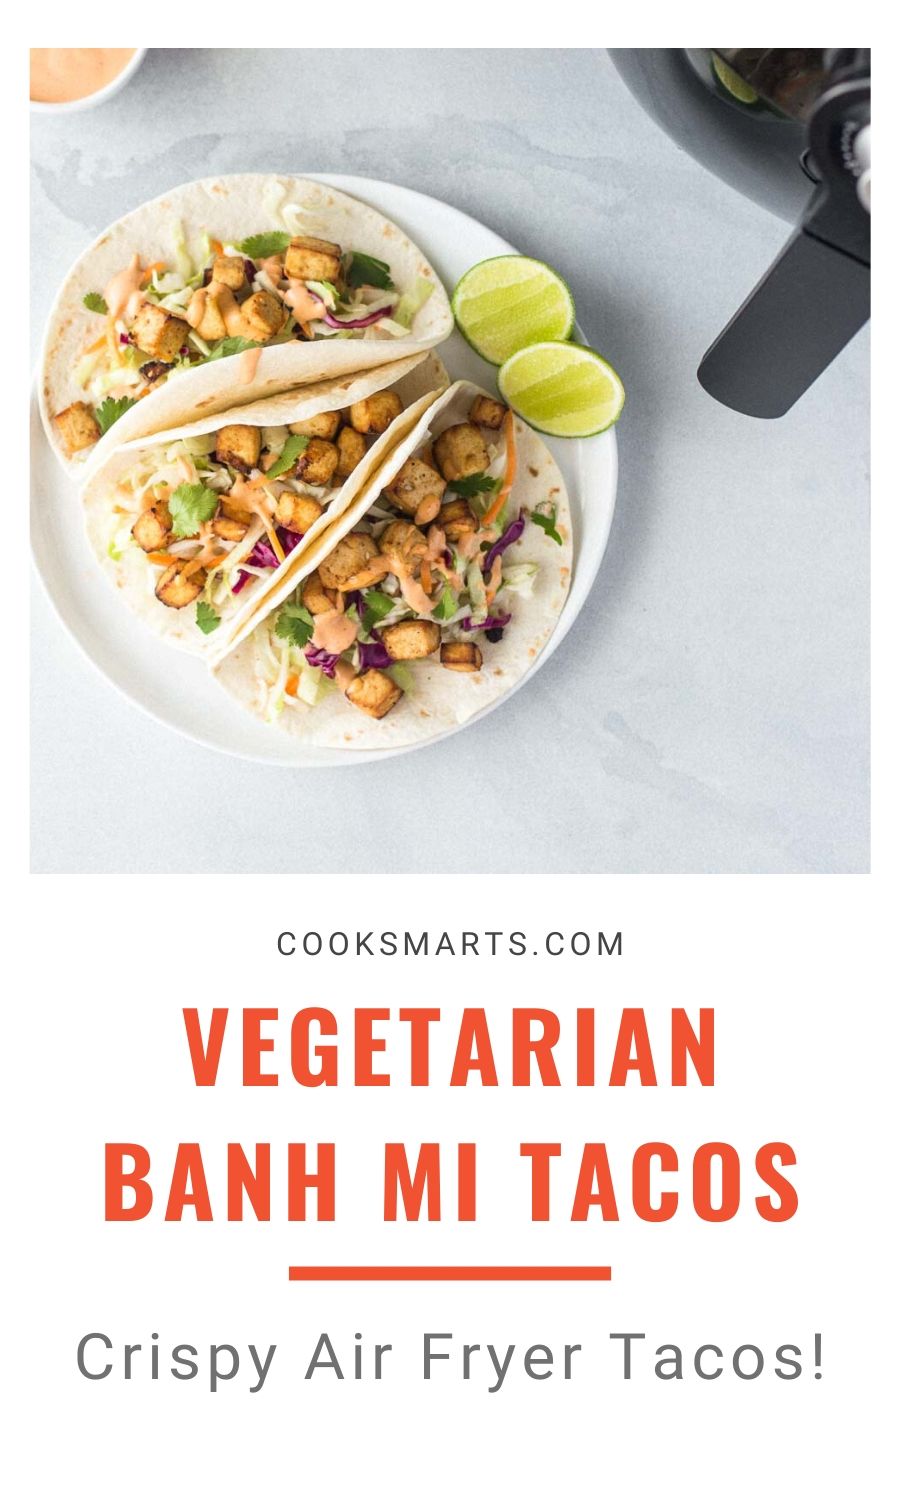 Banh Mi Tacos Recipe for the Air Fryer | Cook Smarts